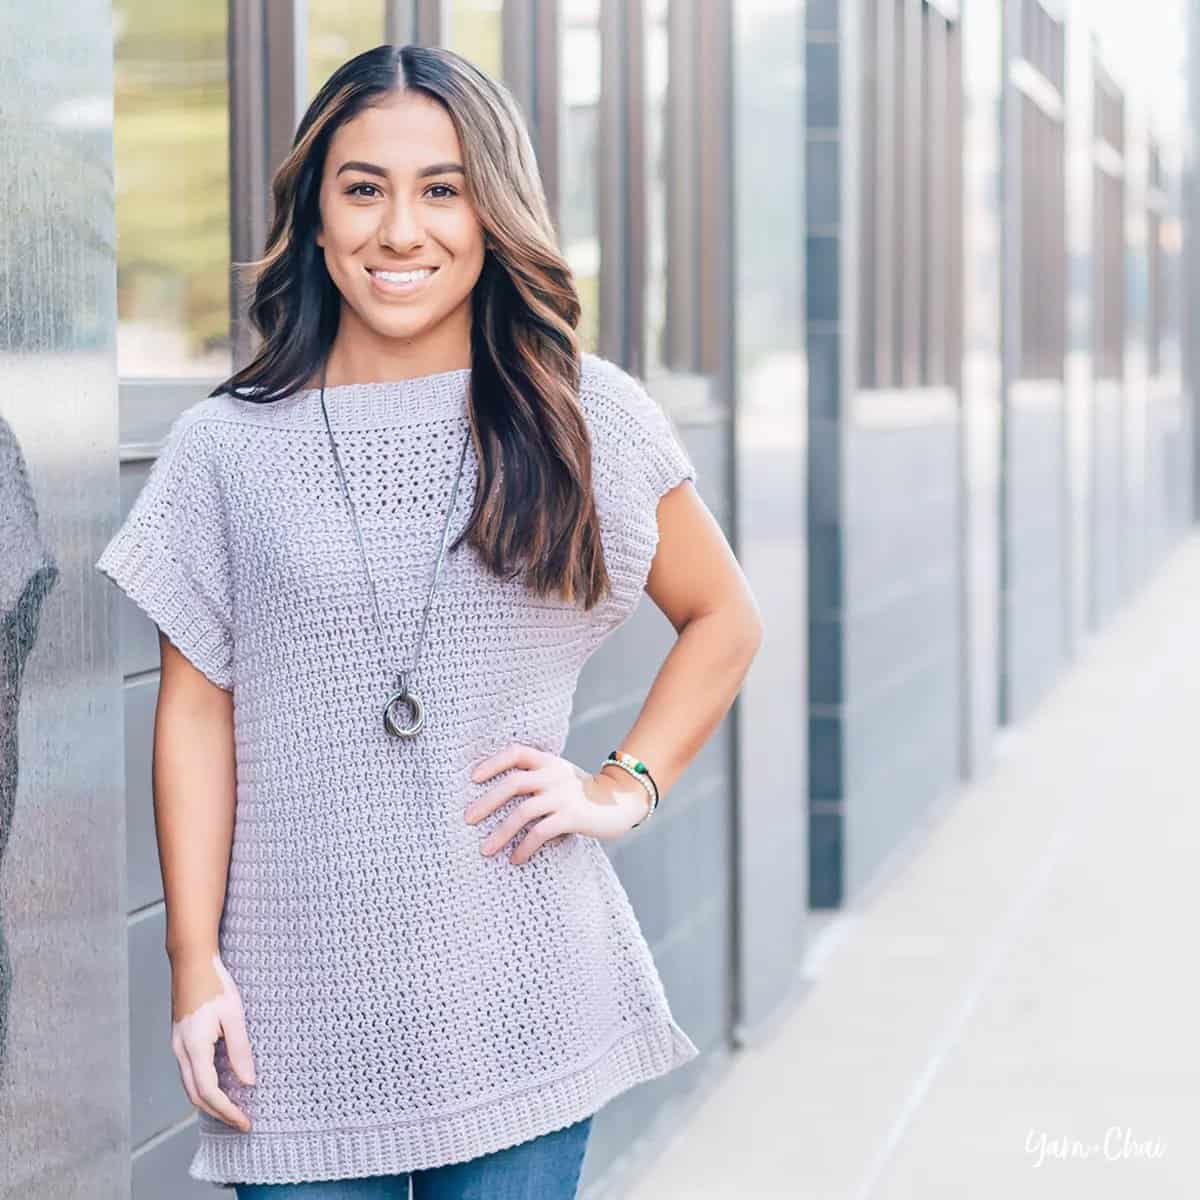 A smiling lady in a short sleeved crochet sweater.